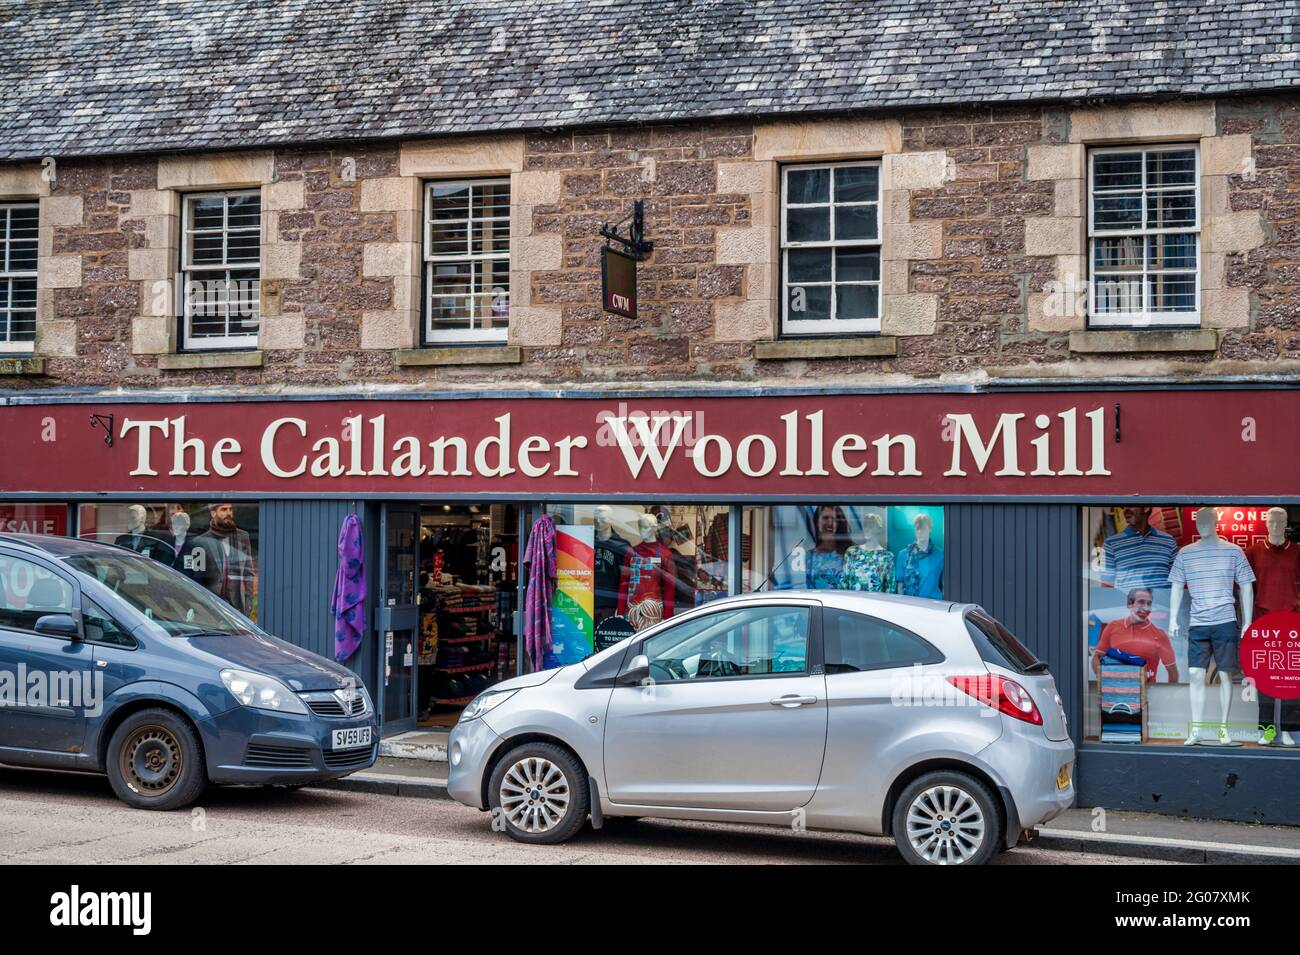 Callander, Scotland- May 29, 2021: The store front and sign for The Callander Woollen Mill Stock Photo